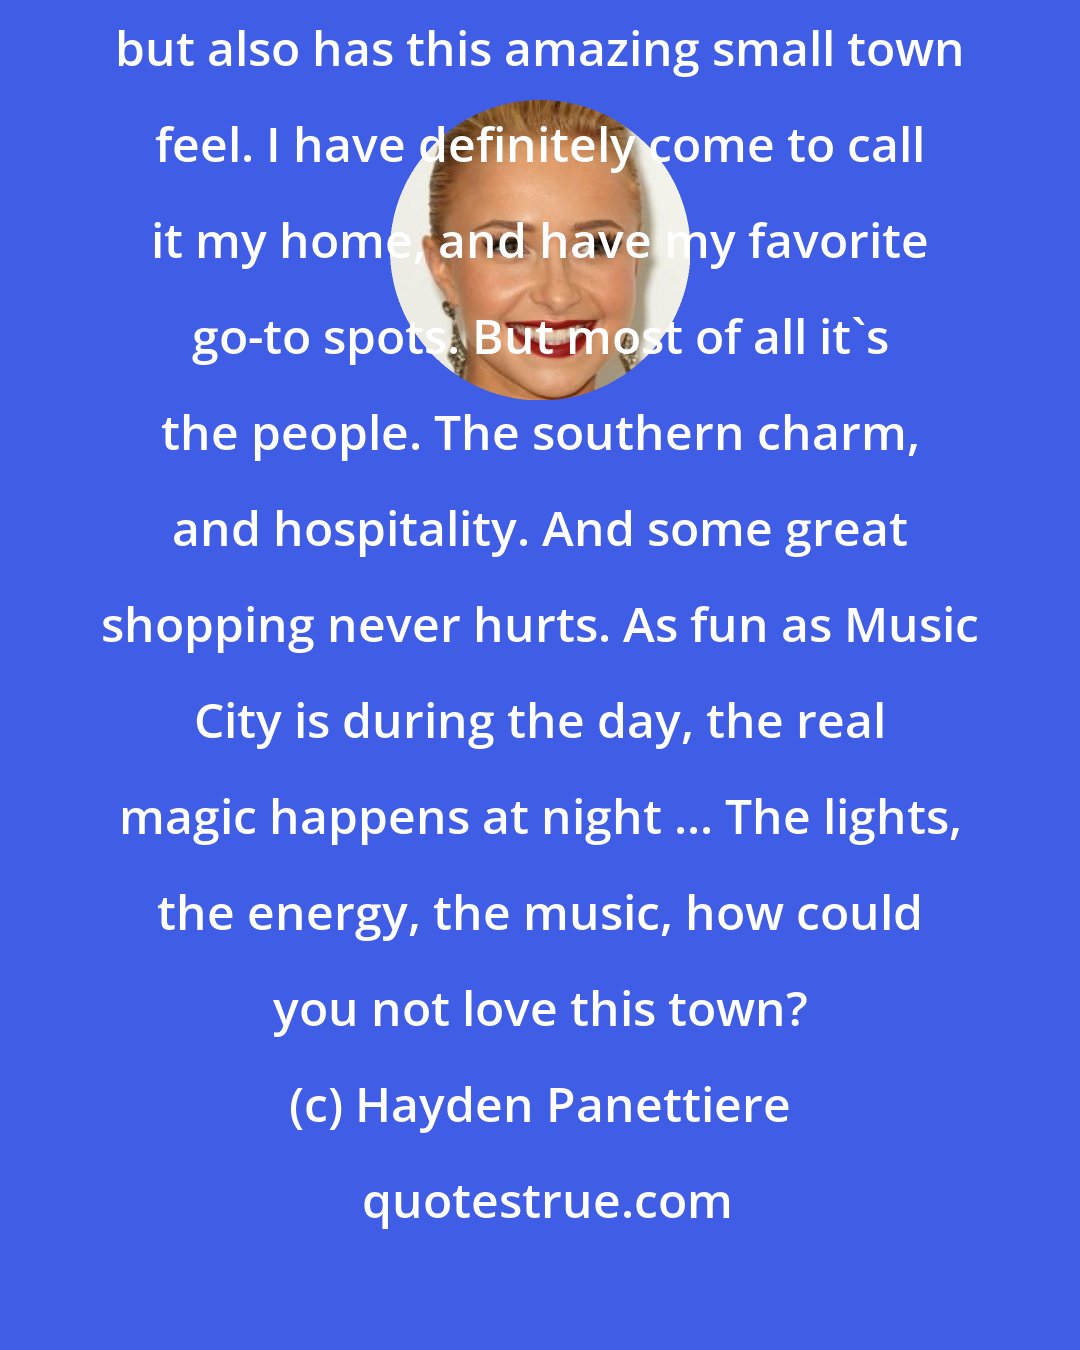 Hayden Panettiere: There is such a cool vibe in Nashville. It is has the excitement of a big city, but also has this amazing small town feel. I have definitely come to call it my home, and have my favorite go-to spots. But most of all it's the people. The southern charm, and hospitality. And some great shopping never hurts. As fun as Music City is during the day, the real magic happens at night ... The lights, the energy, the music, how could you not love this town?